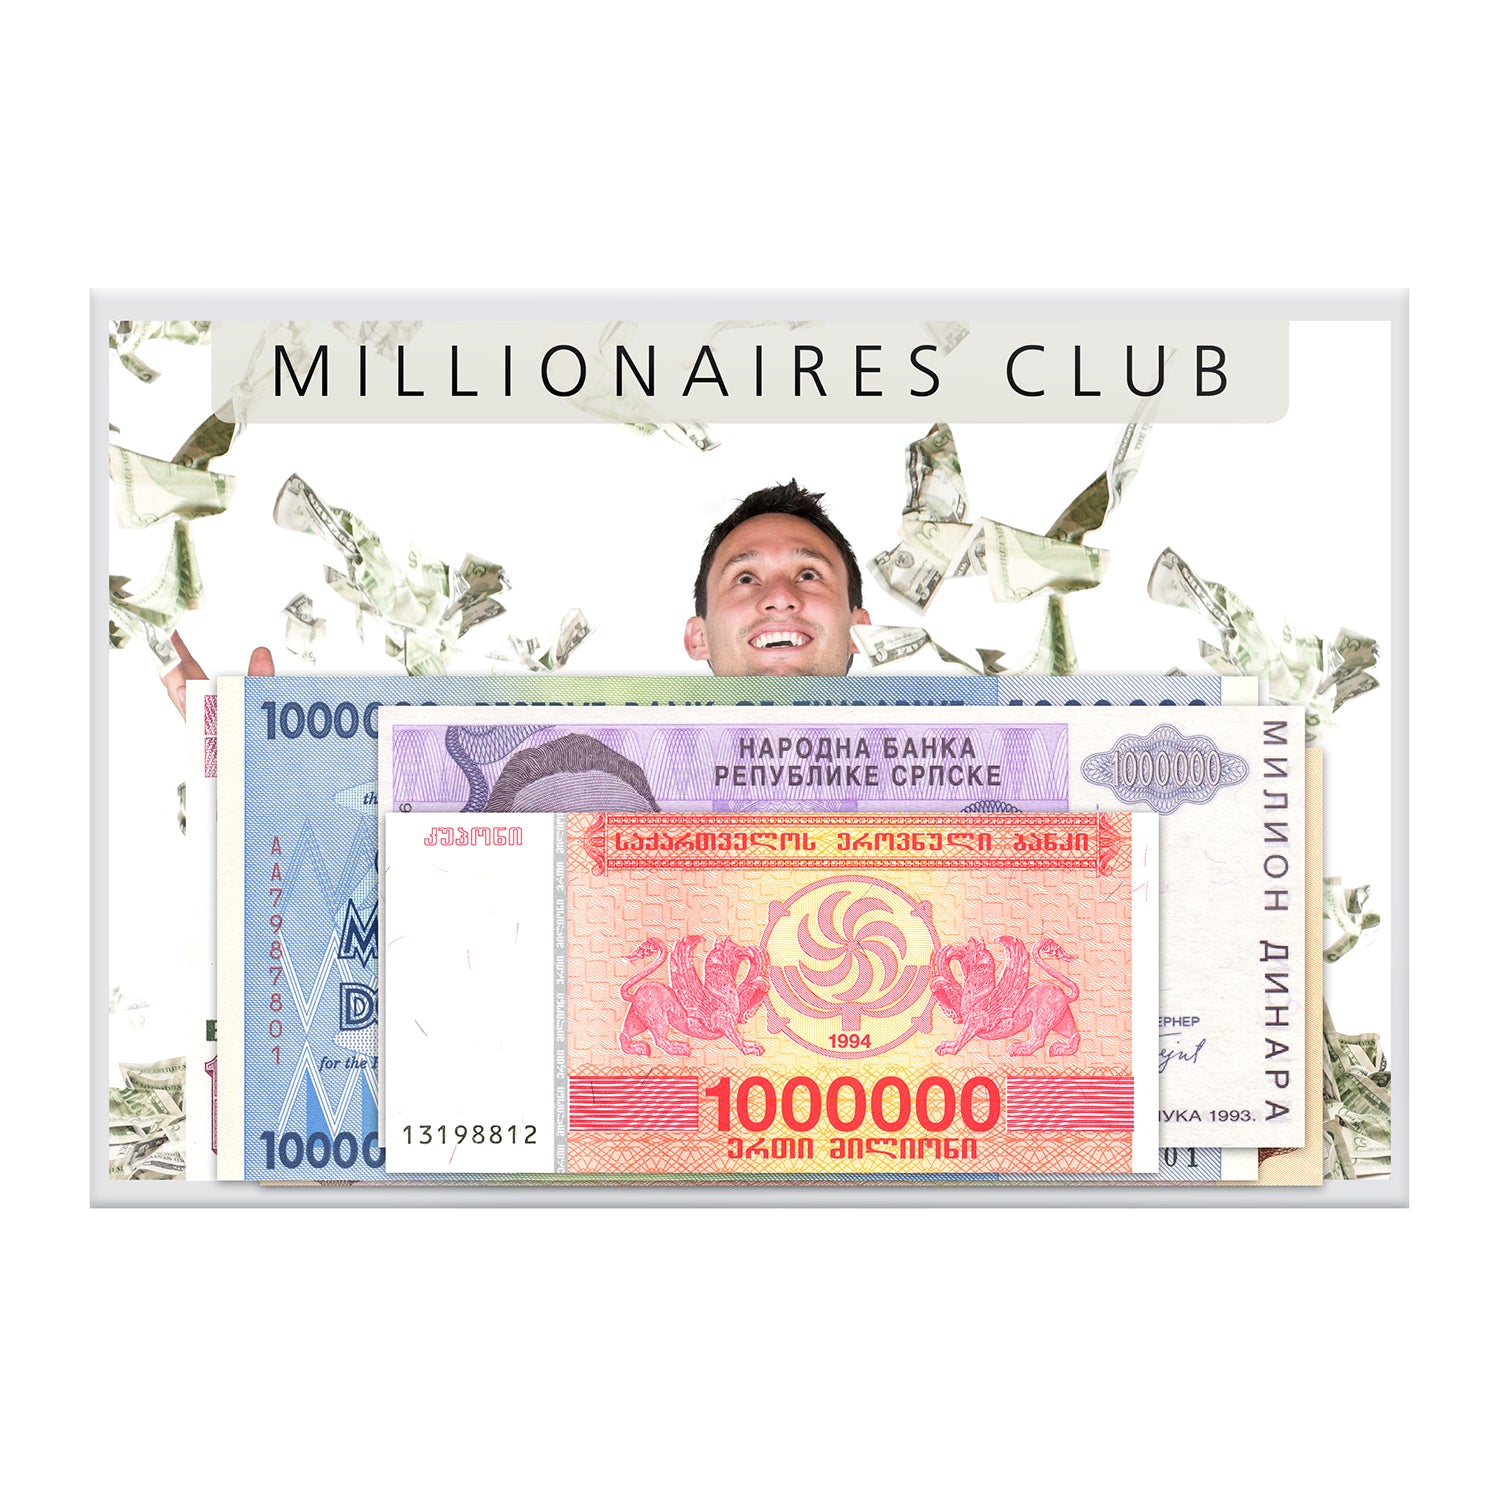 Banknote Collection "Millionaires Club"